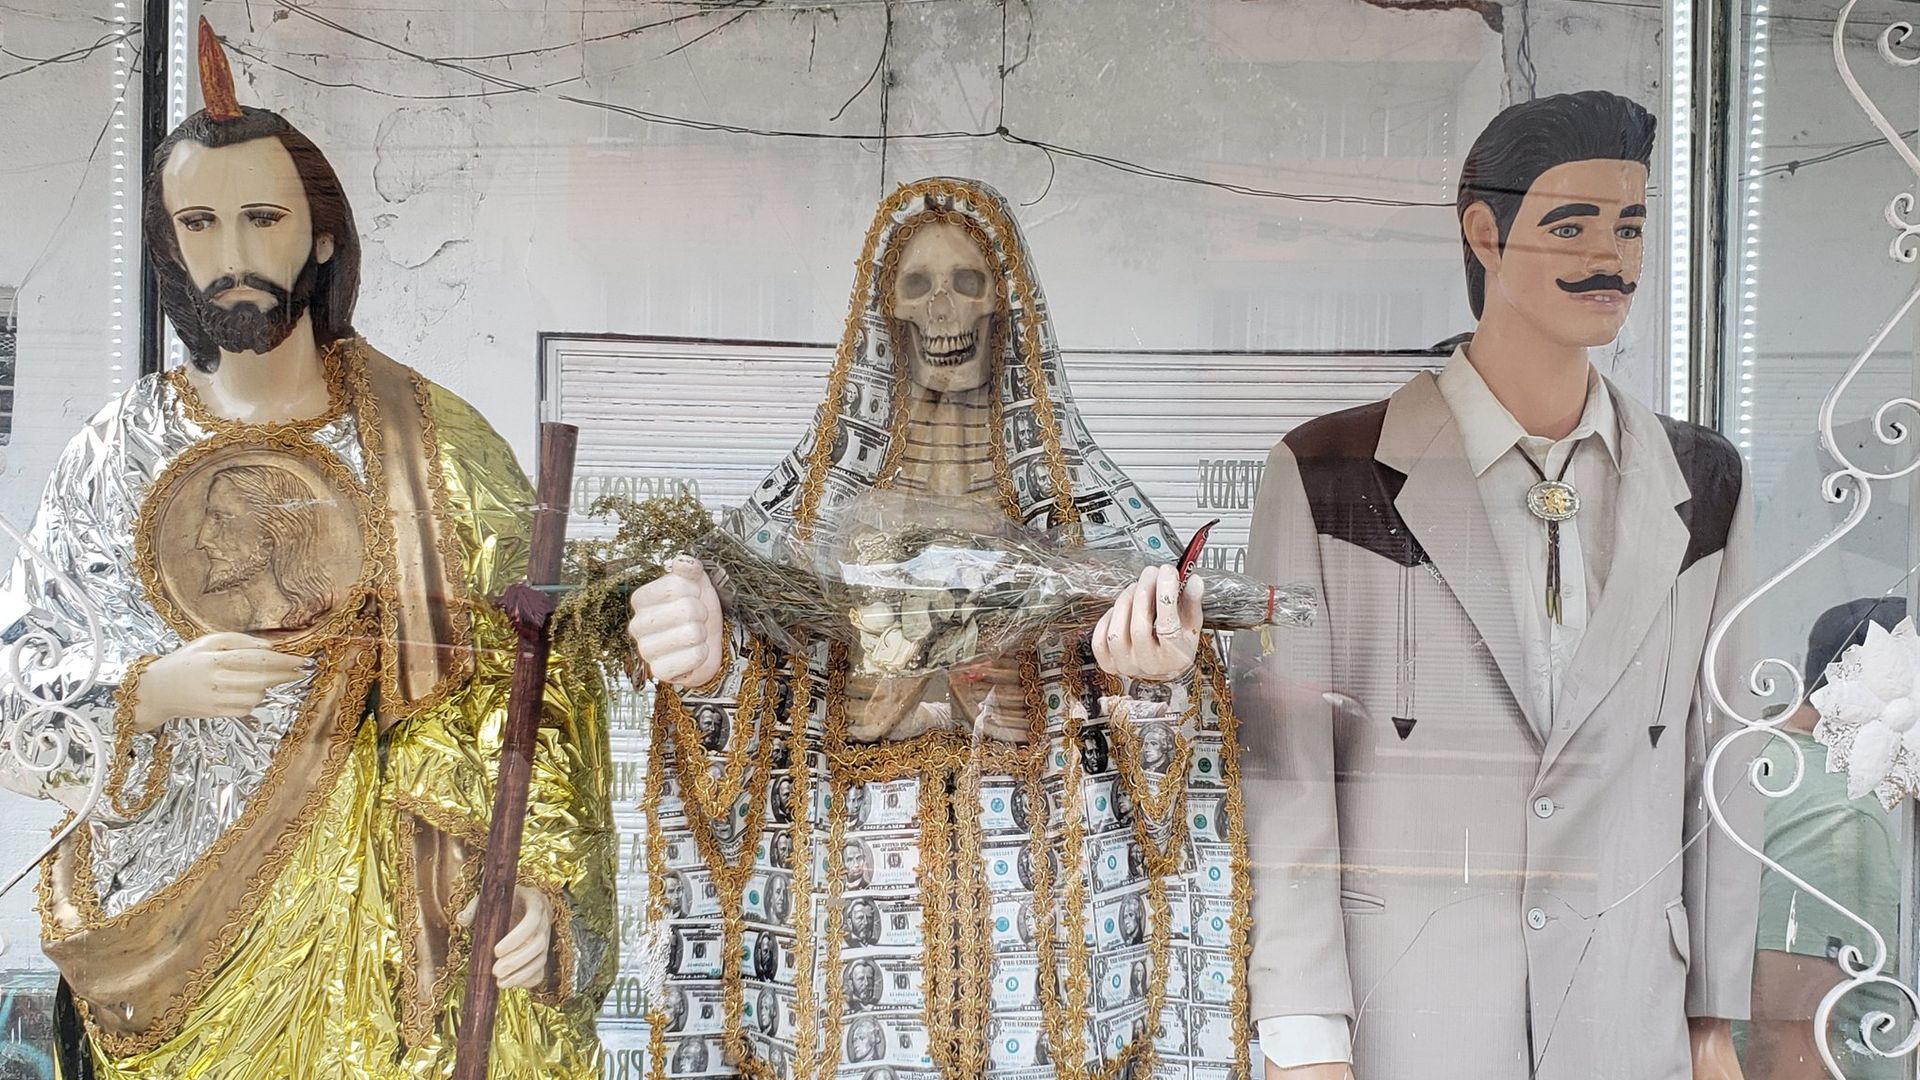 Statues of Santa Muerte, Jesus Malverde and Saint Jude in Colonia Doctores of Mexico City.